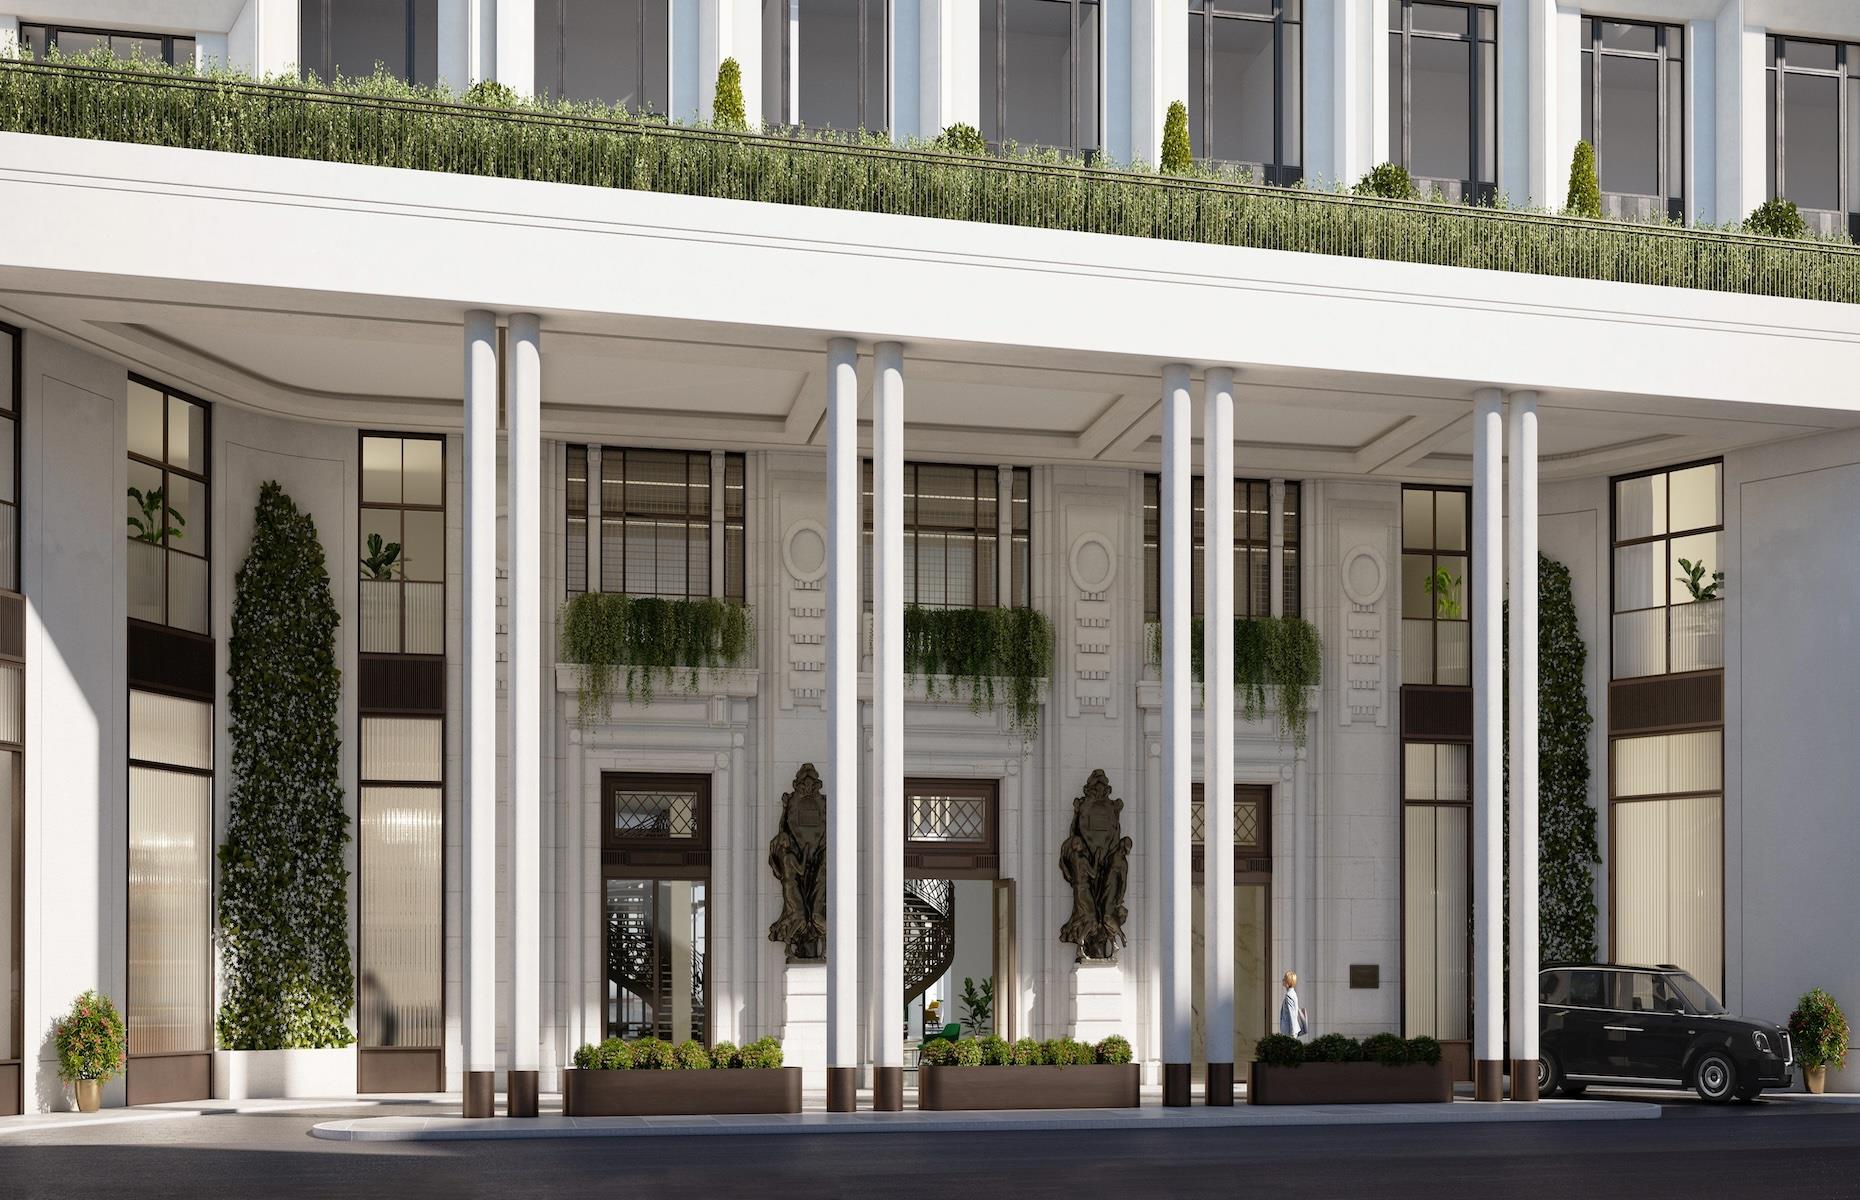 <p>Finally breathing new life into the former Whiteleys department store in Bayswater, Six Senses London will open in early 2024 with 110 rooms and suites, along with 14 branded residences. As part of a £1bn ($1.2bn) overhaul of the long-since scruffy site, which includes retail and restaurants, the historic bones of the Art Deco landmark remain intact. Below ground the Six Senses Spa, including a large pool, will soothe any city stresses, while Six Senses Place on the second floor will be a social club “where wellness and community meet.”</p>